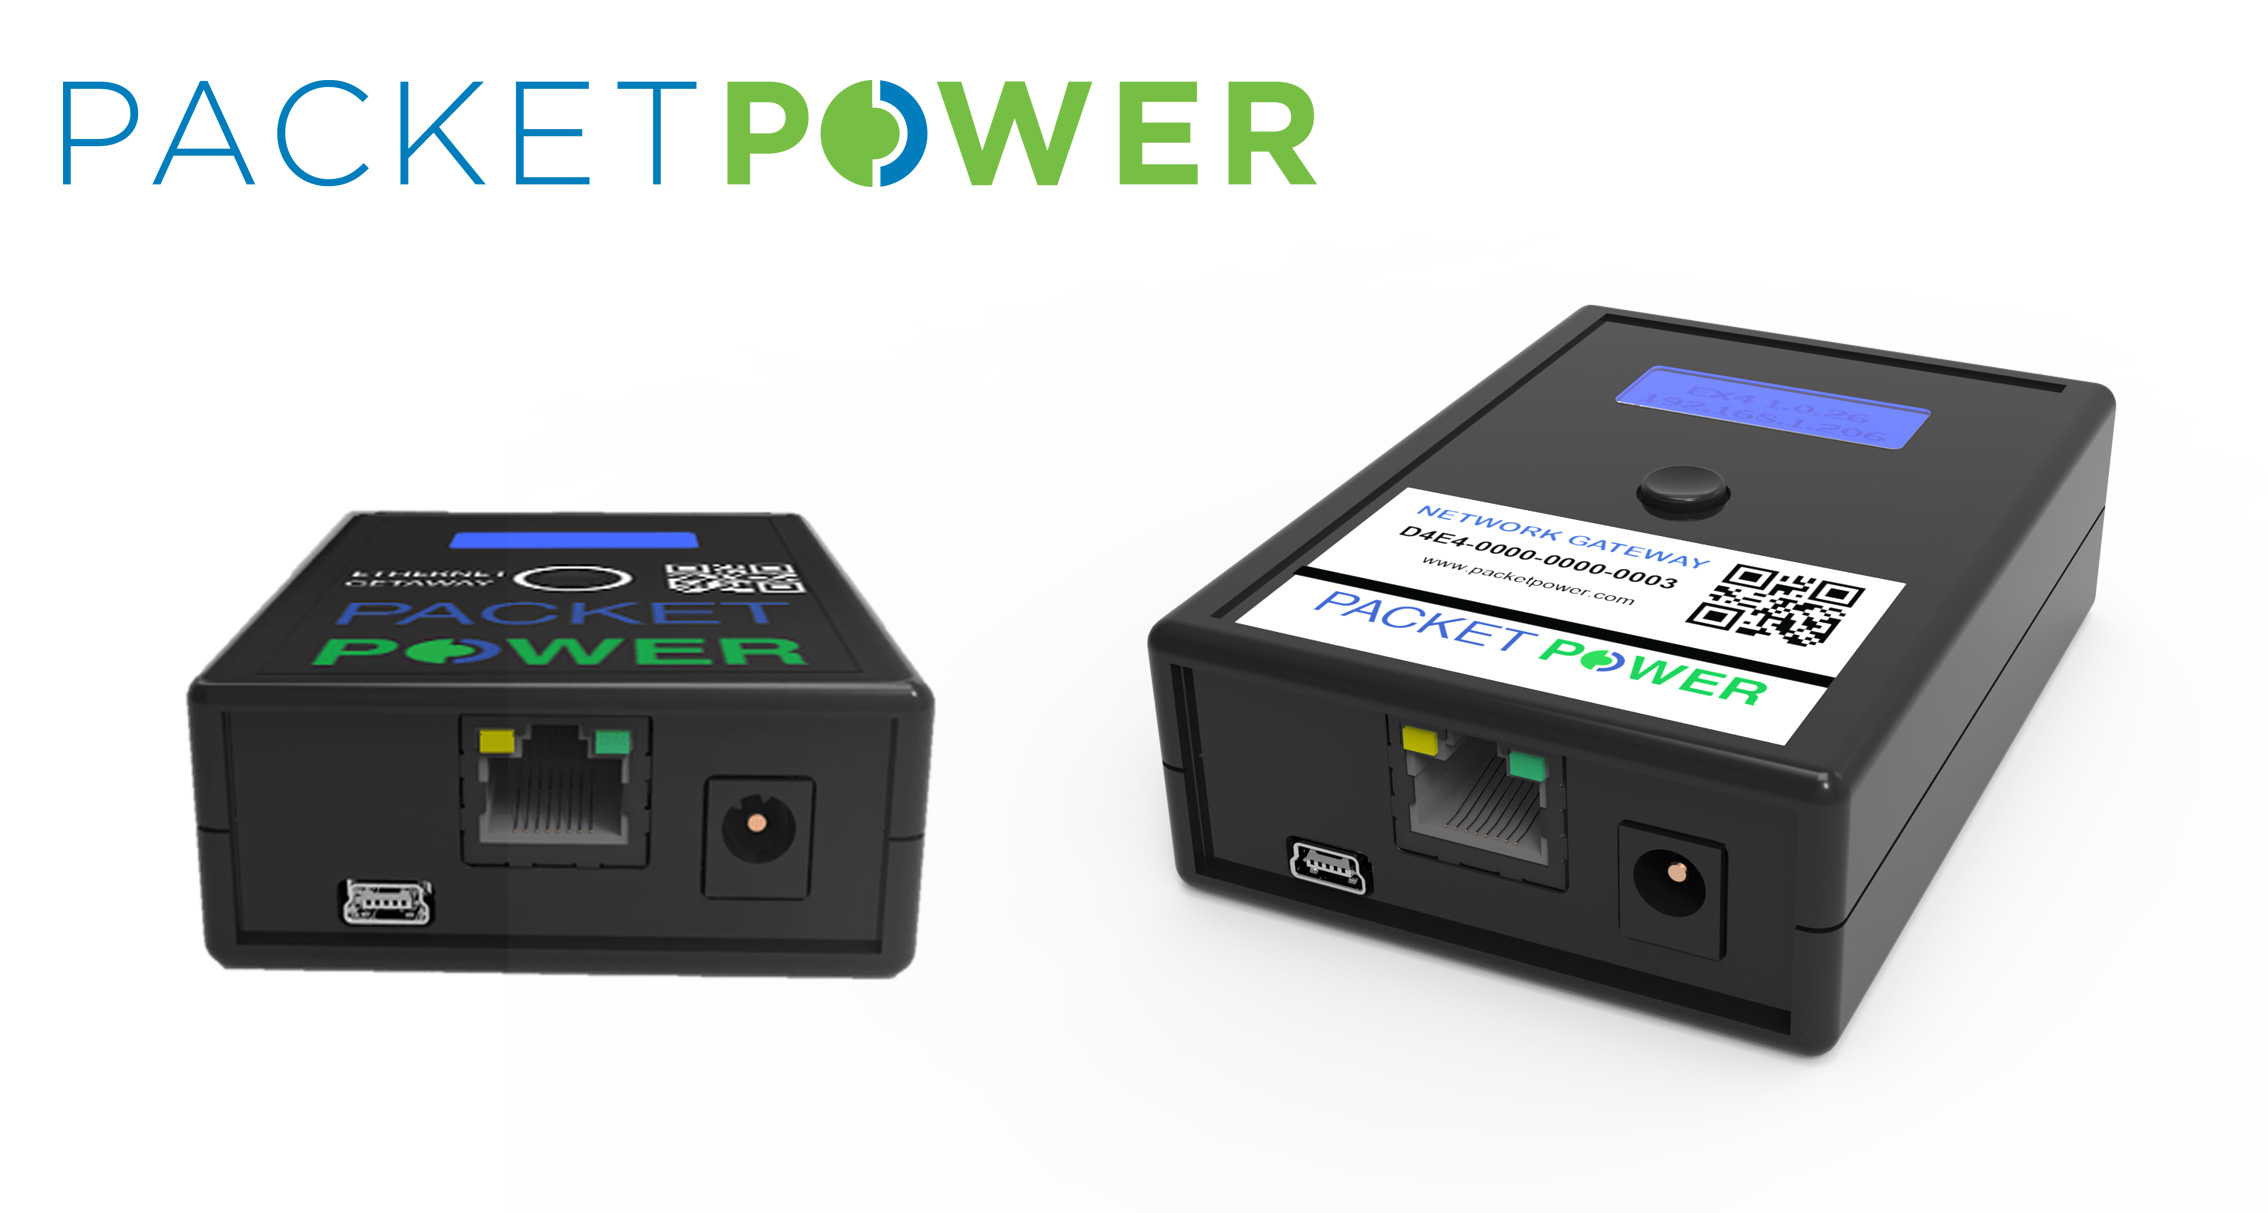 Packet Power Ethernet Gateway and Hub Launched